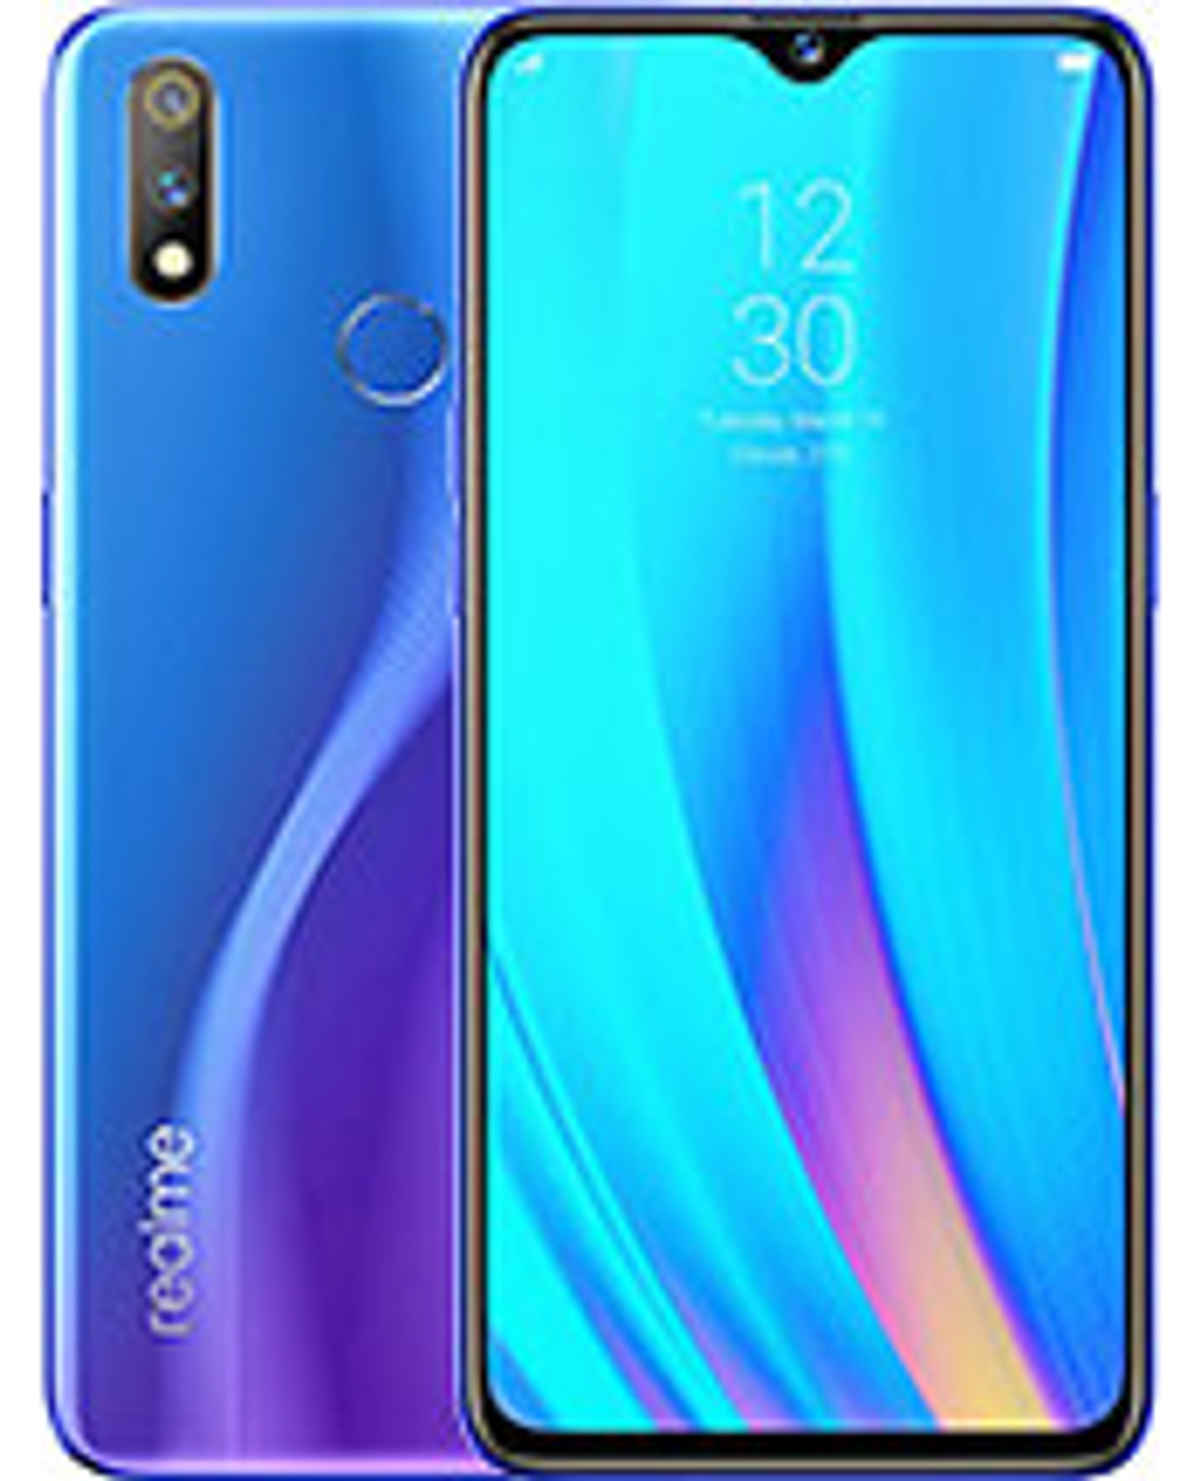 Realme 5 Pro 128GB Price in India, Full Specifications & Features